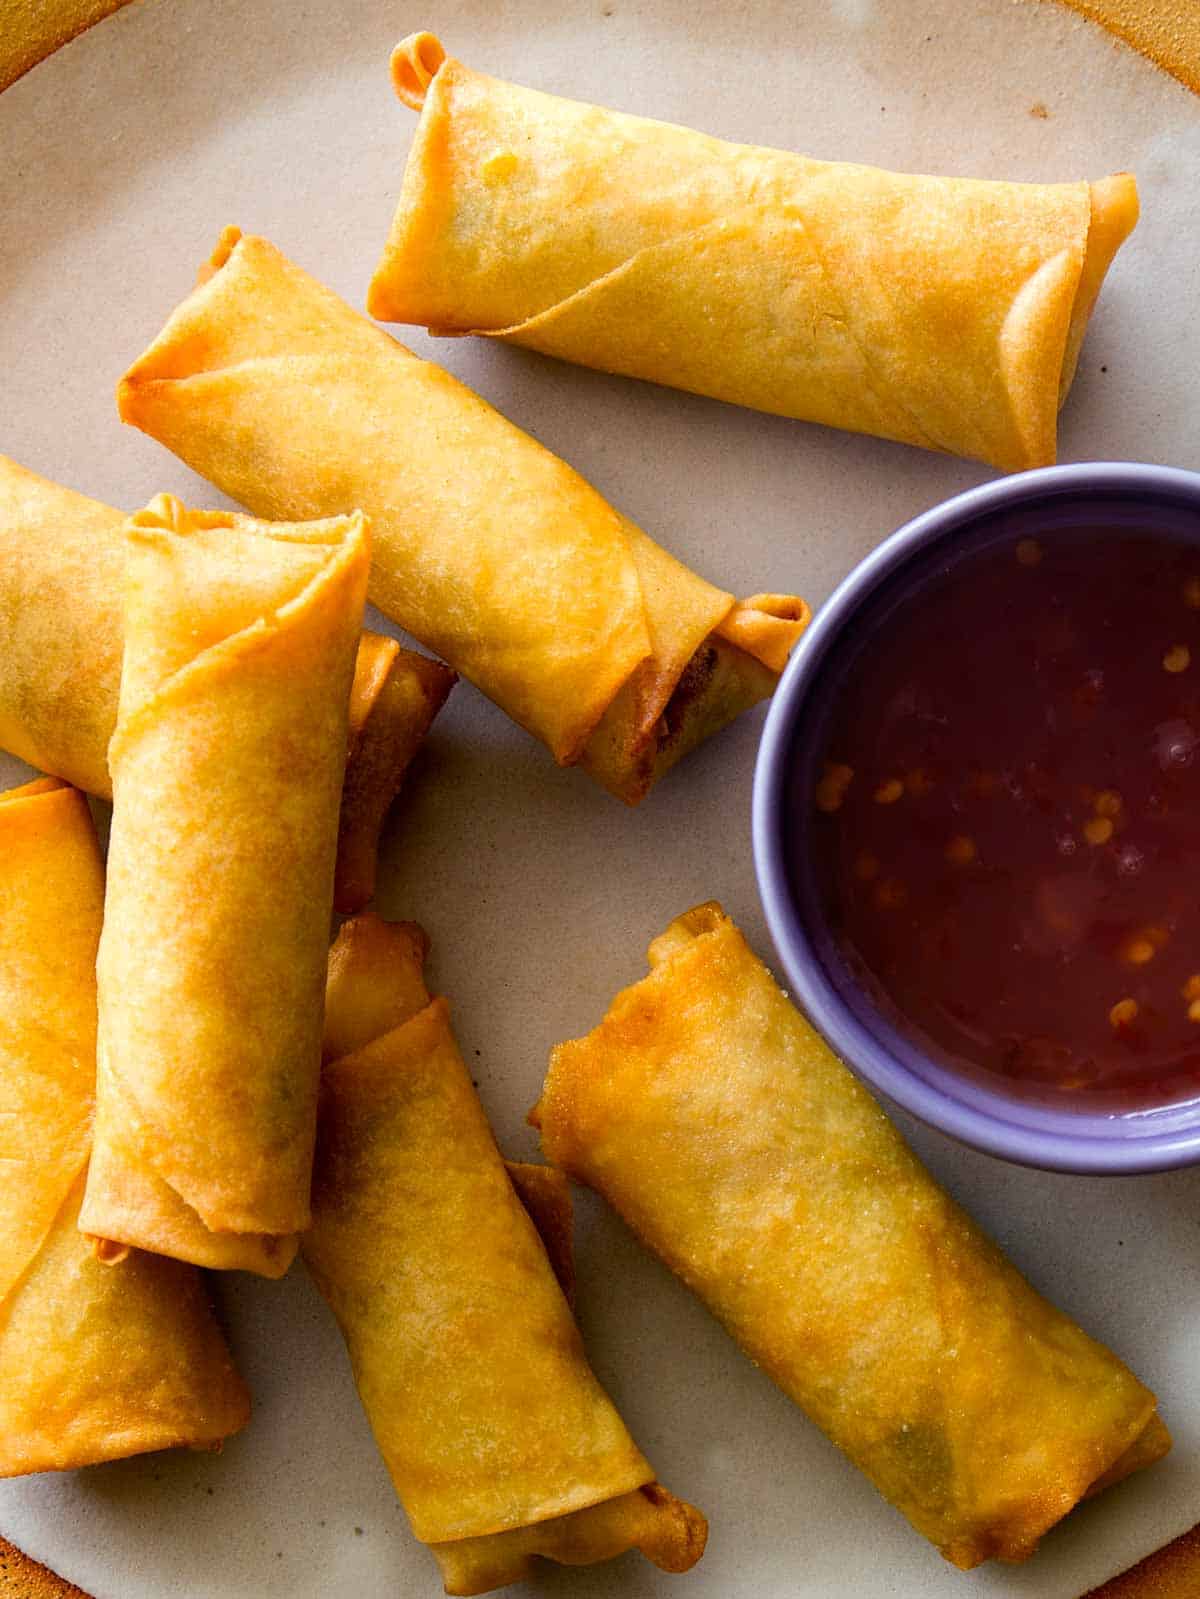 Recipes Using Egg Roll Wrappers - Non Traditional Egg Roll Filling